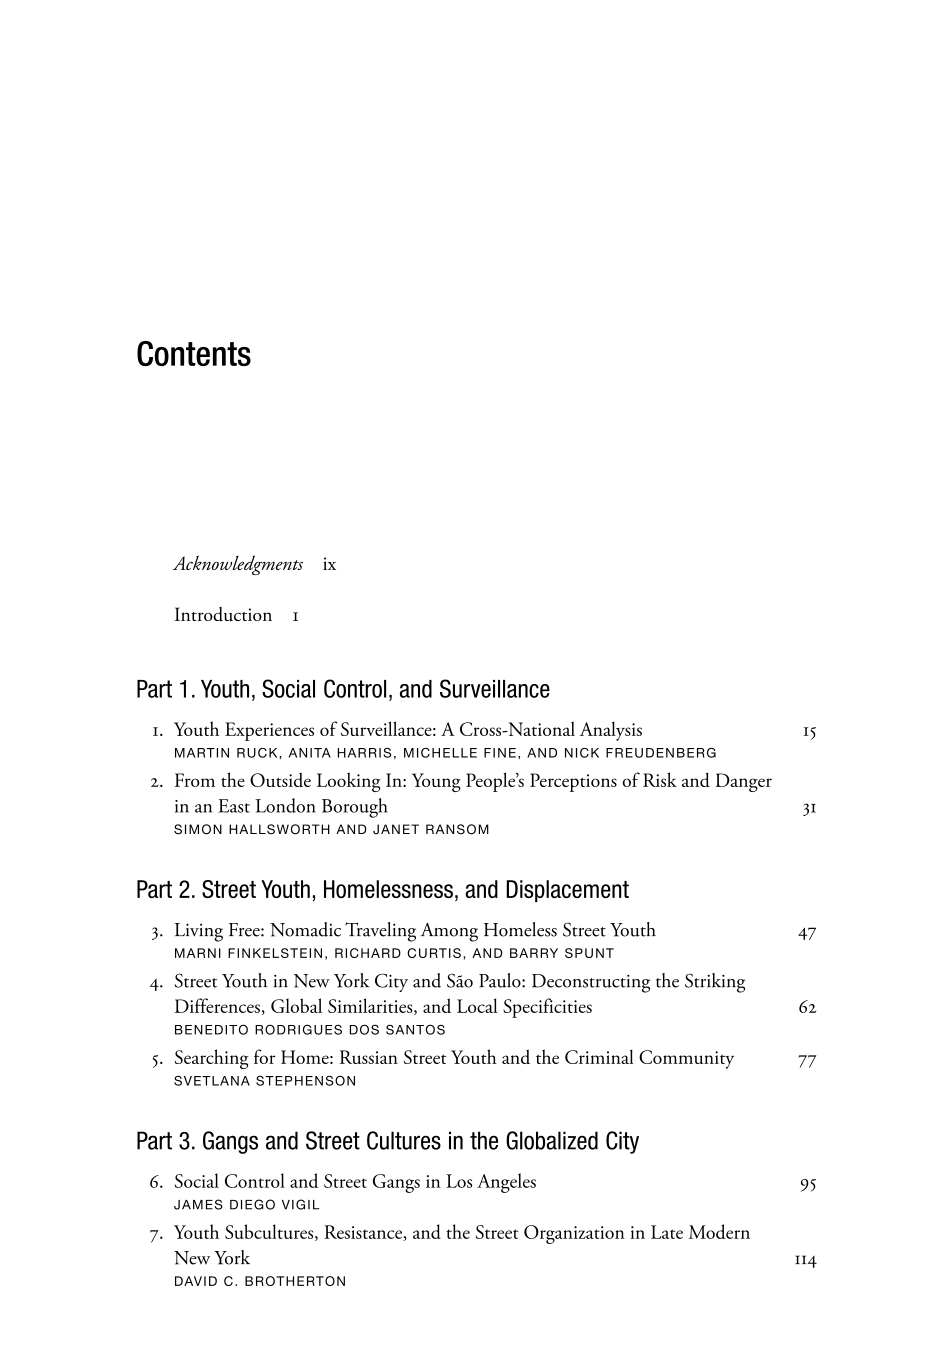 Globalizing the Streets: Cross-Cultural Perspectives on Youth, Social Control, and Empowerment page vii